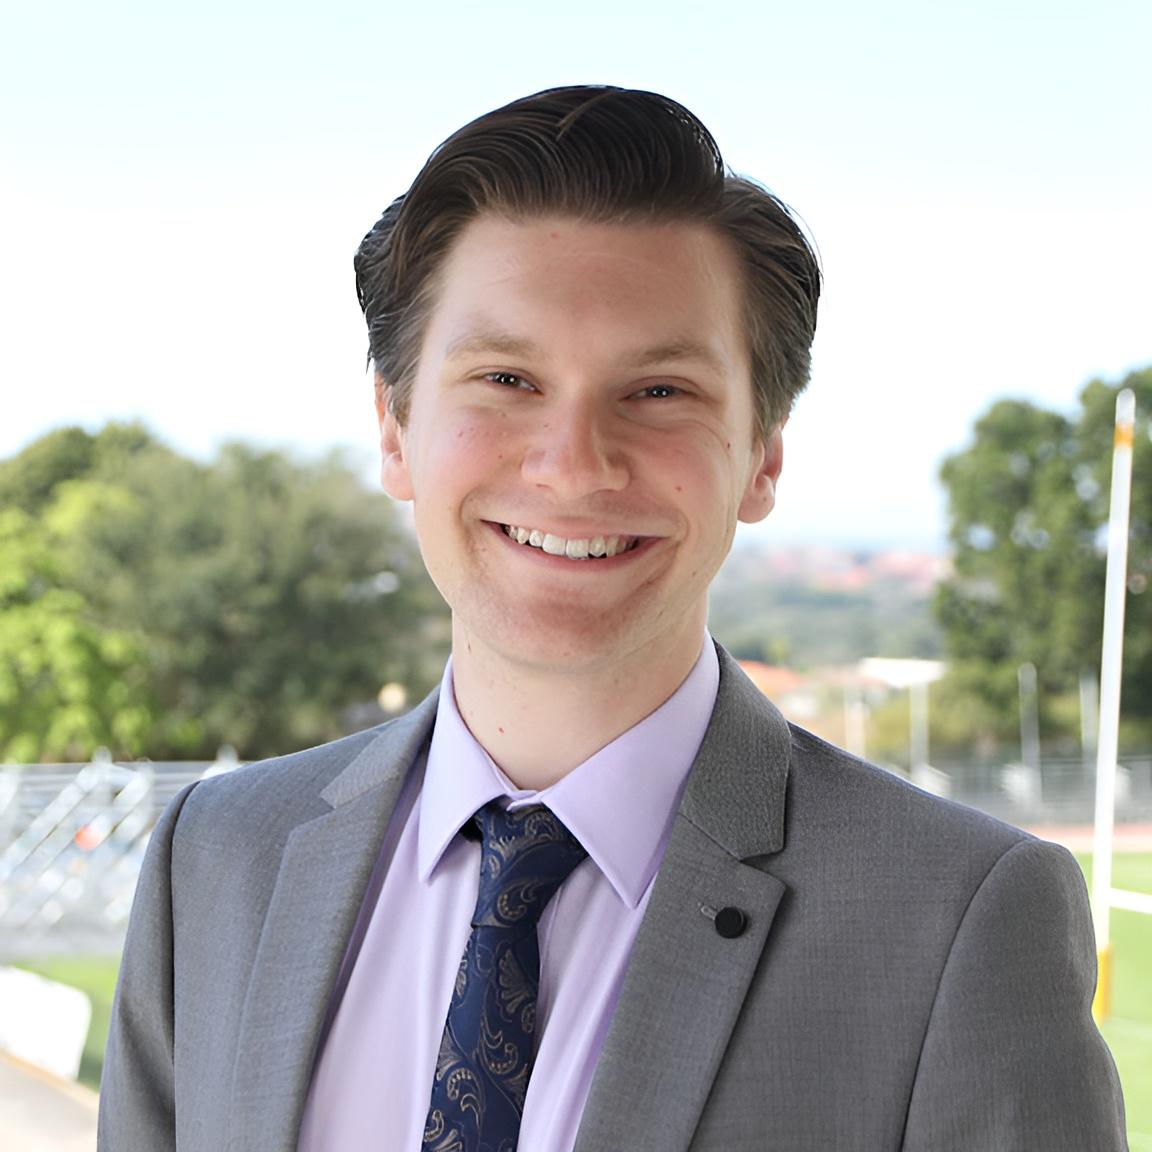 James, wearing a suit and tie, smiles at the camera in front a sports field